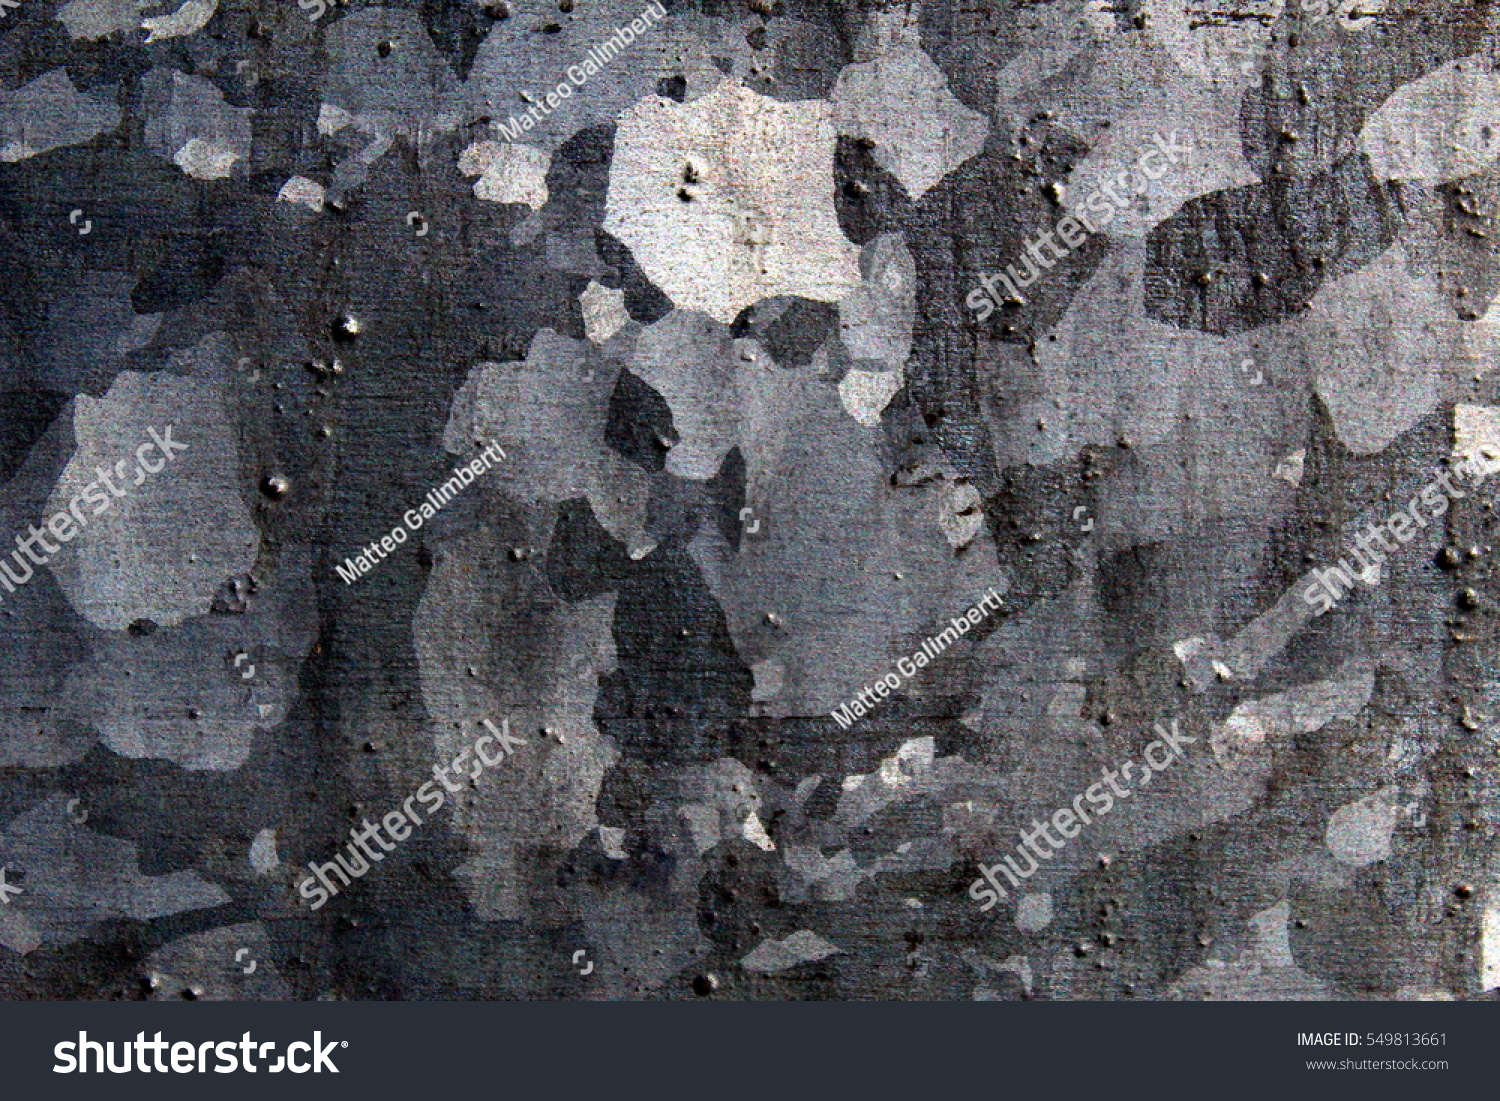 Annealing texture on a steel surface #549813661